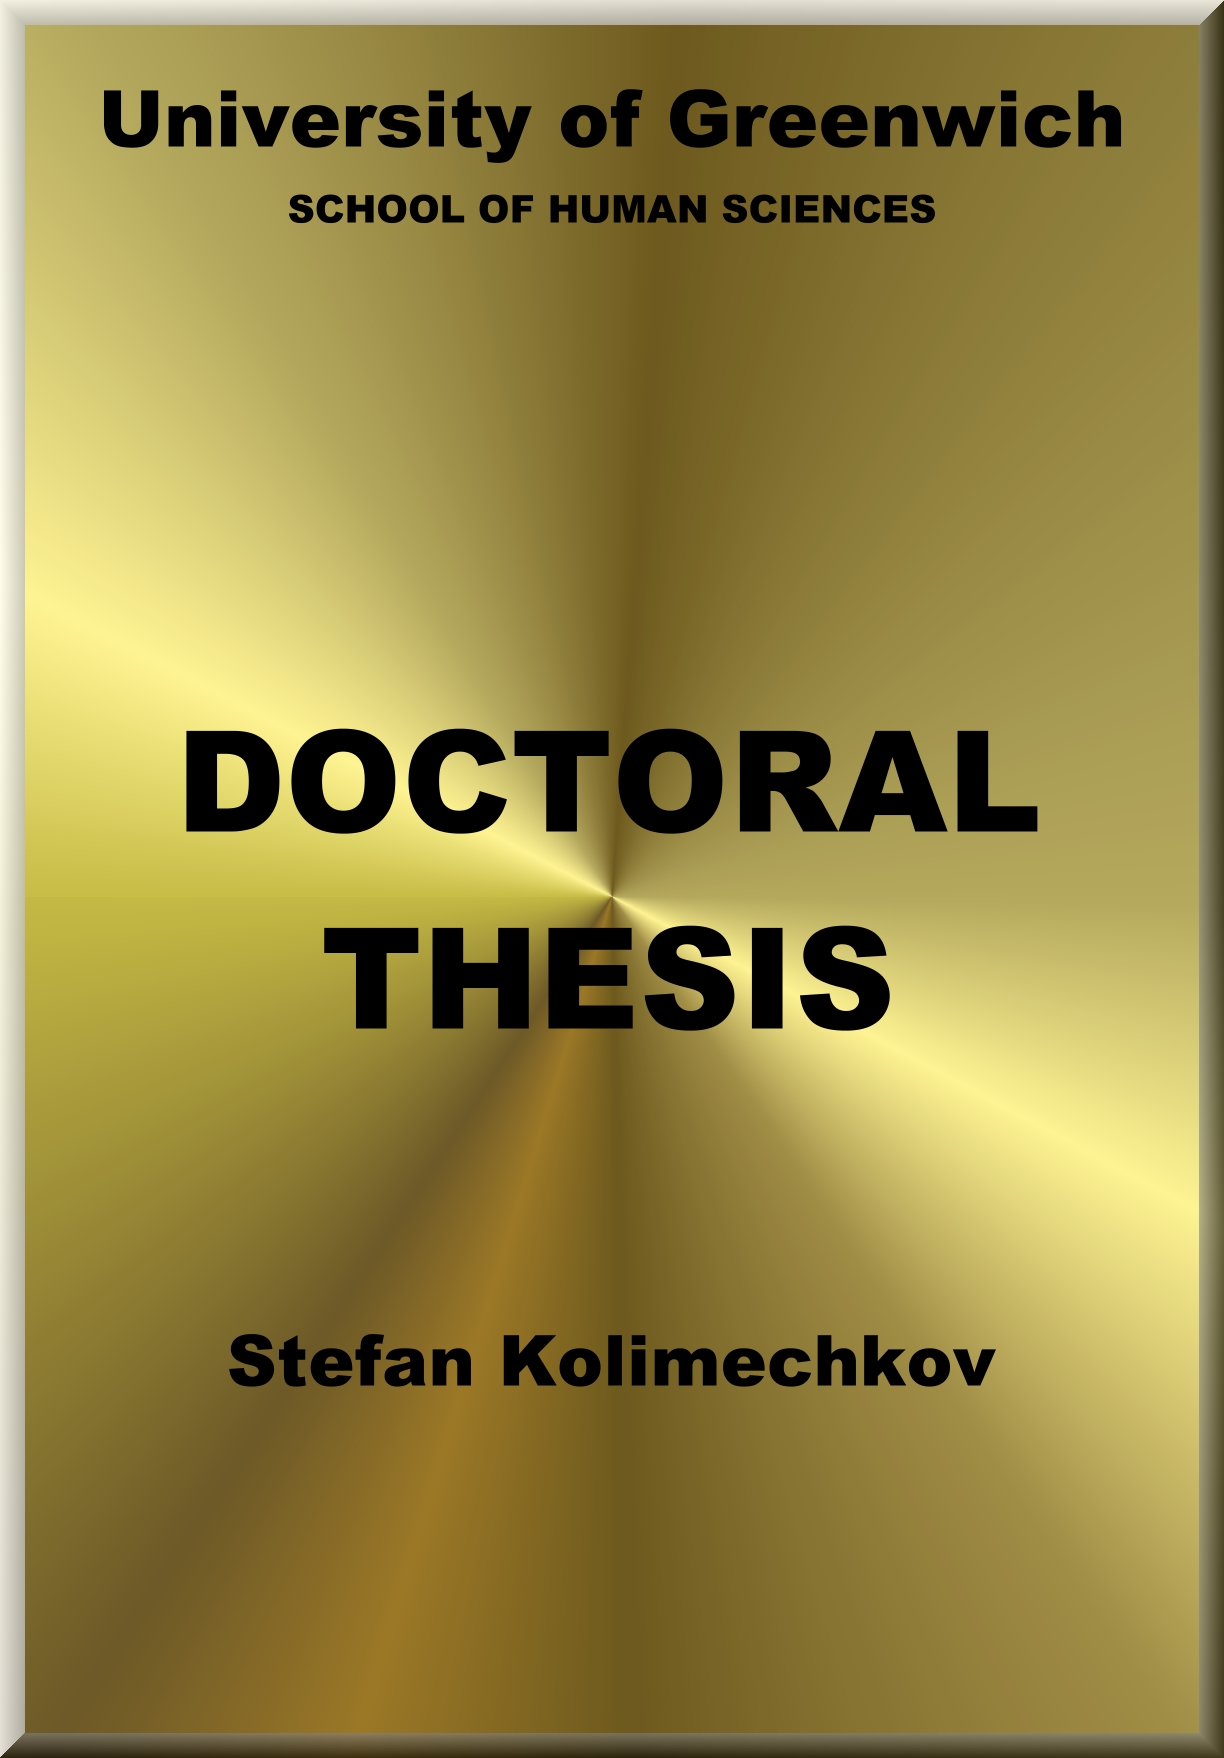 Doctoral Thesis in Human Sciences